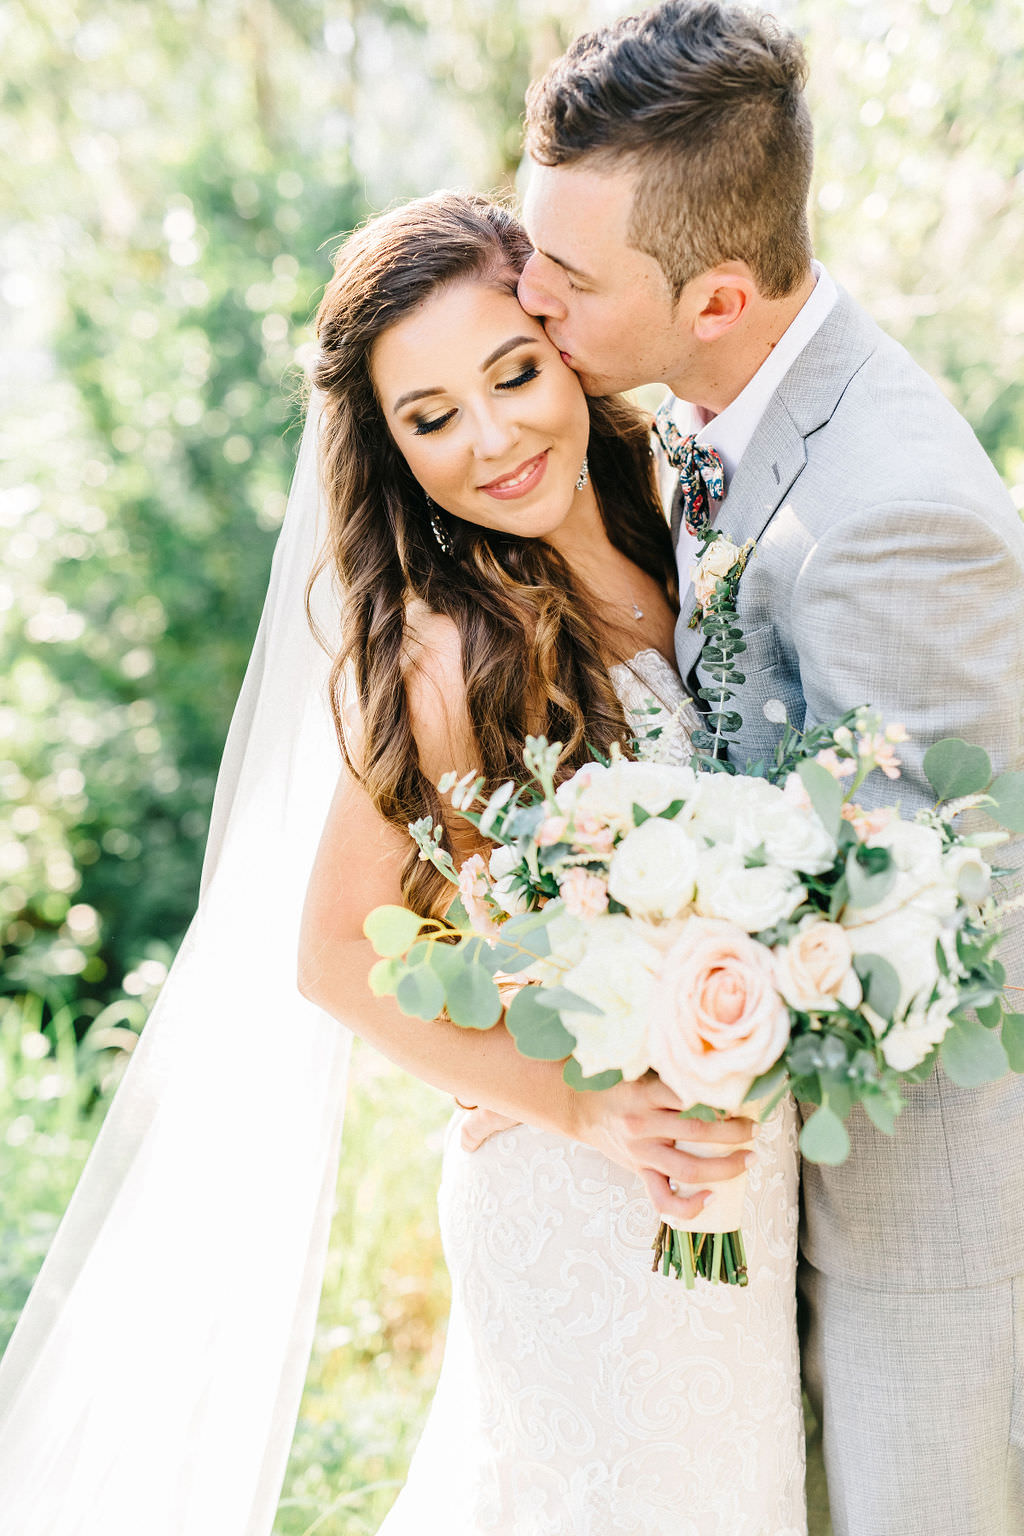 Romantic Tampa Bay Bride and Groom Wedding Portrait, Soft Bridal Bouquet with Blush Pink Roses, Ivory Flowers, White, Florals, Greenery, Groom in Light Gray INDOCHINO Suit